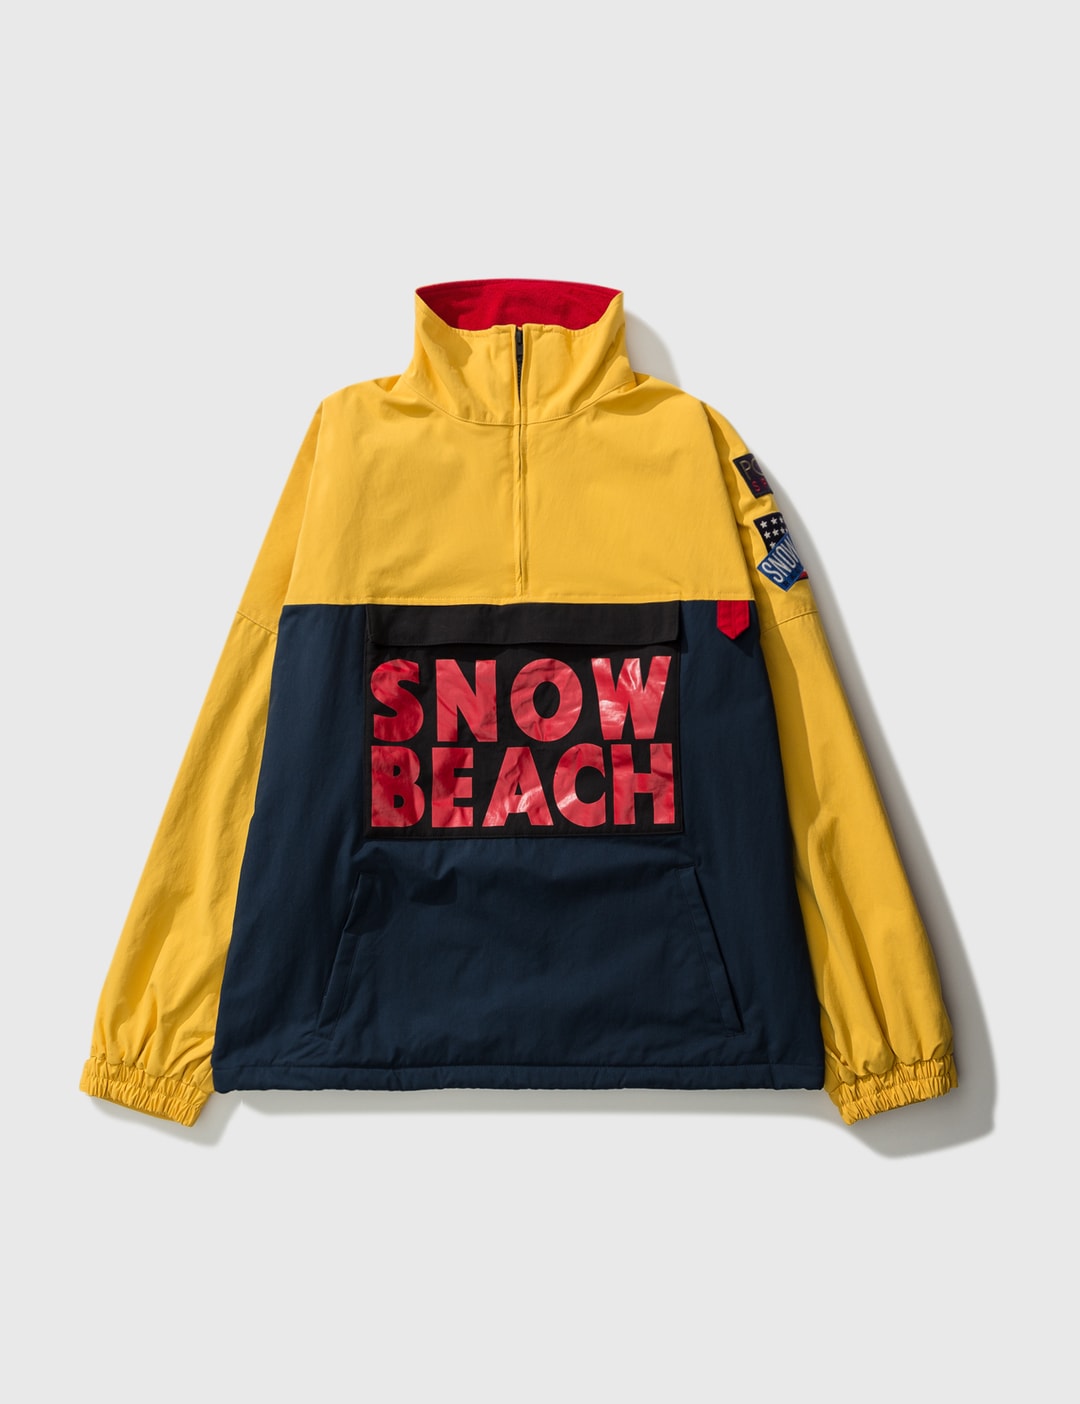 Polo Ralph Lauren - Polo Ralph Lauren 'snow Beach' Half Zip Smock Jacket |  HBX - Globally Curated Fashion and Lifestyle by Hypebeast